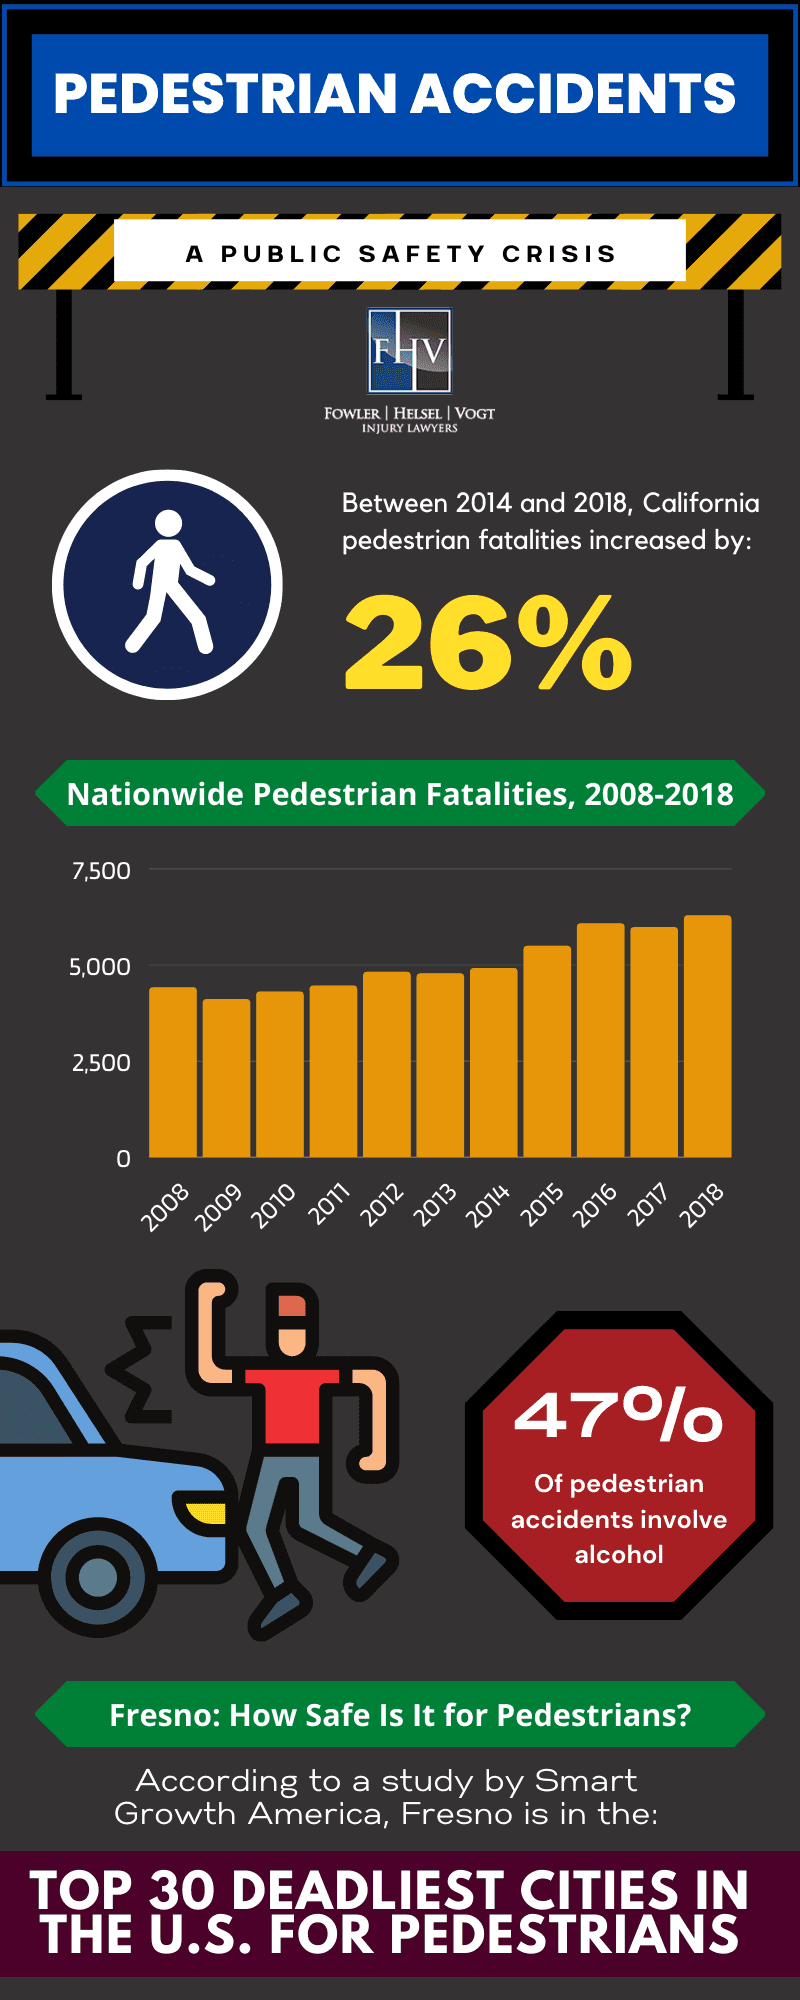 Infographic on pedestrian accidents (a public safety crisis)